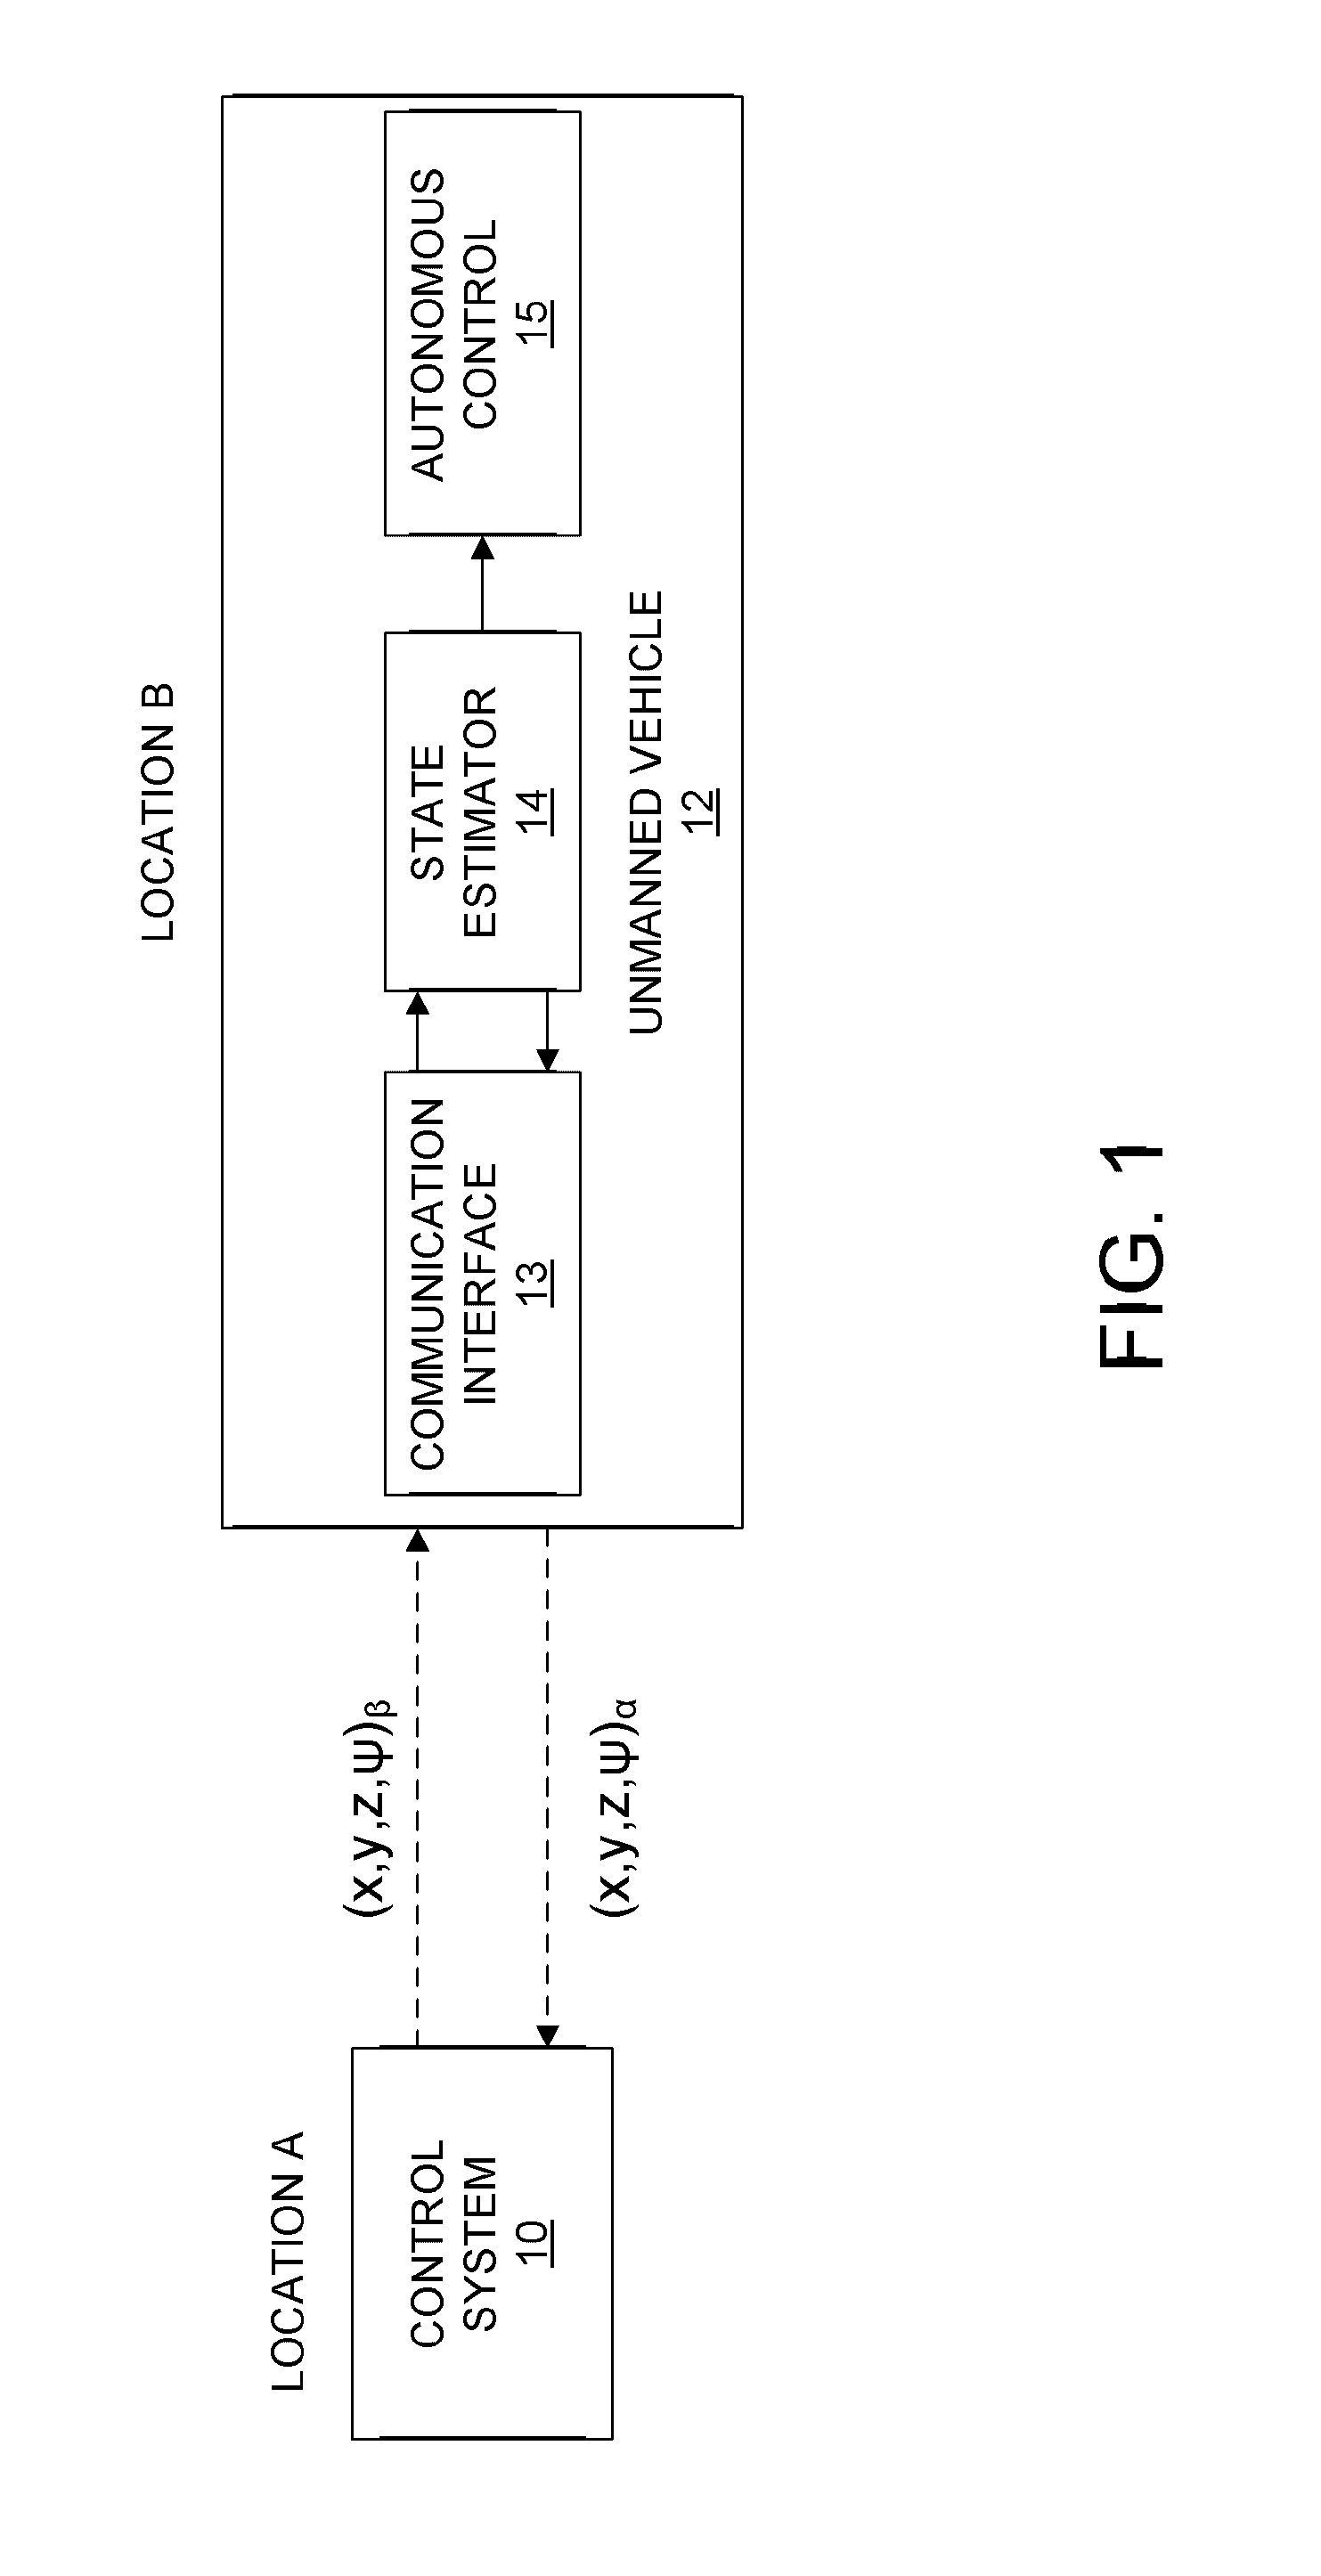 System and Method for Providing Perceived First-Order Control of an Unmanned Vehicle